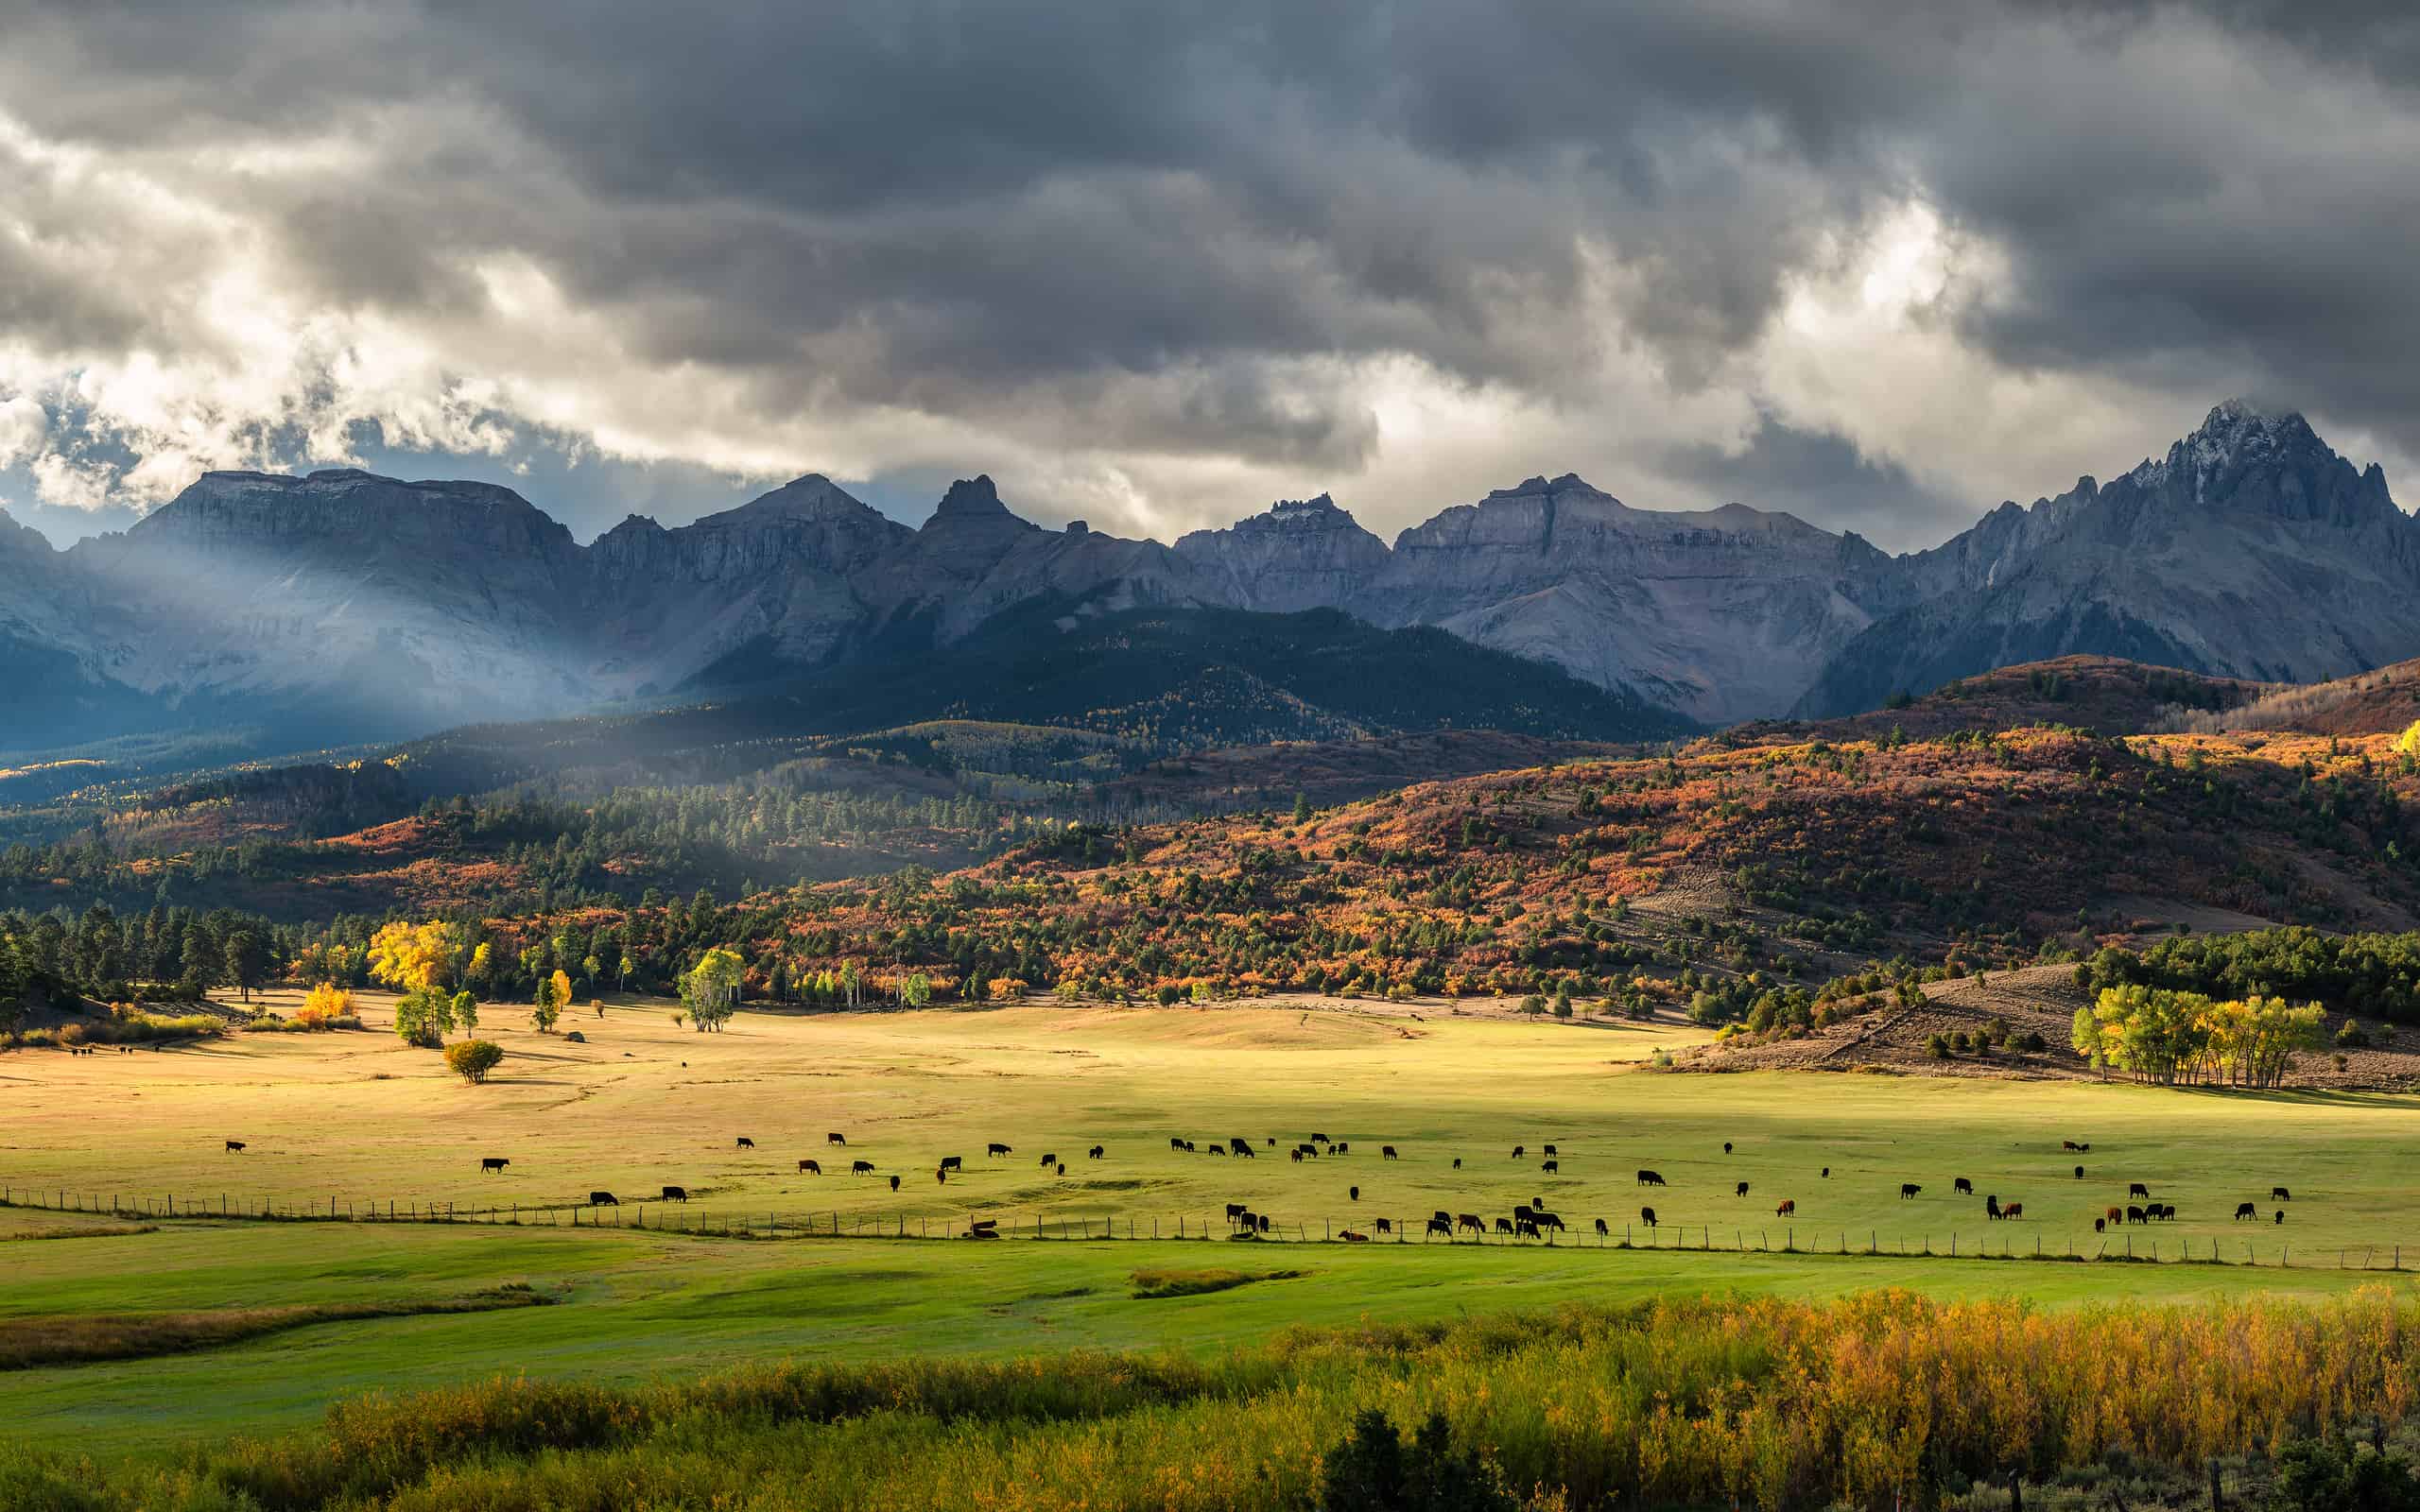 Autumn at a cattle ranch in Colorado near Ridgway - County Road 9 - Ralph Lauren Double RL - Rocky Mountains